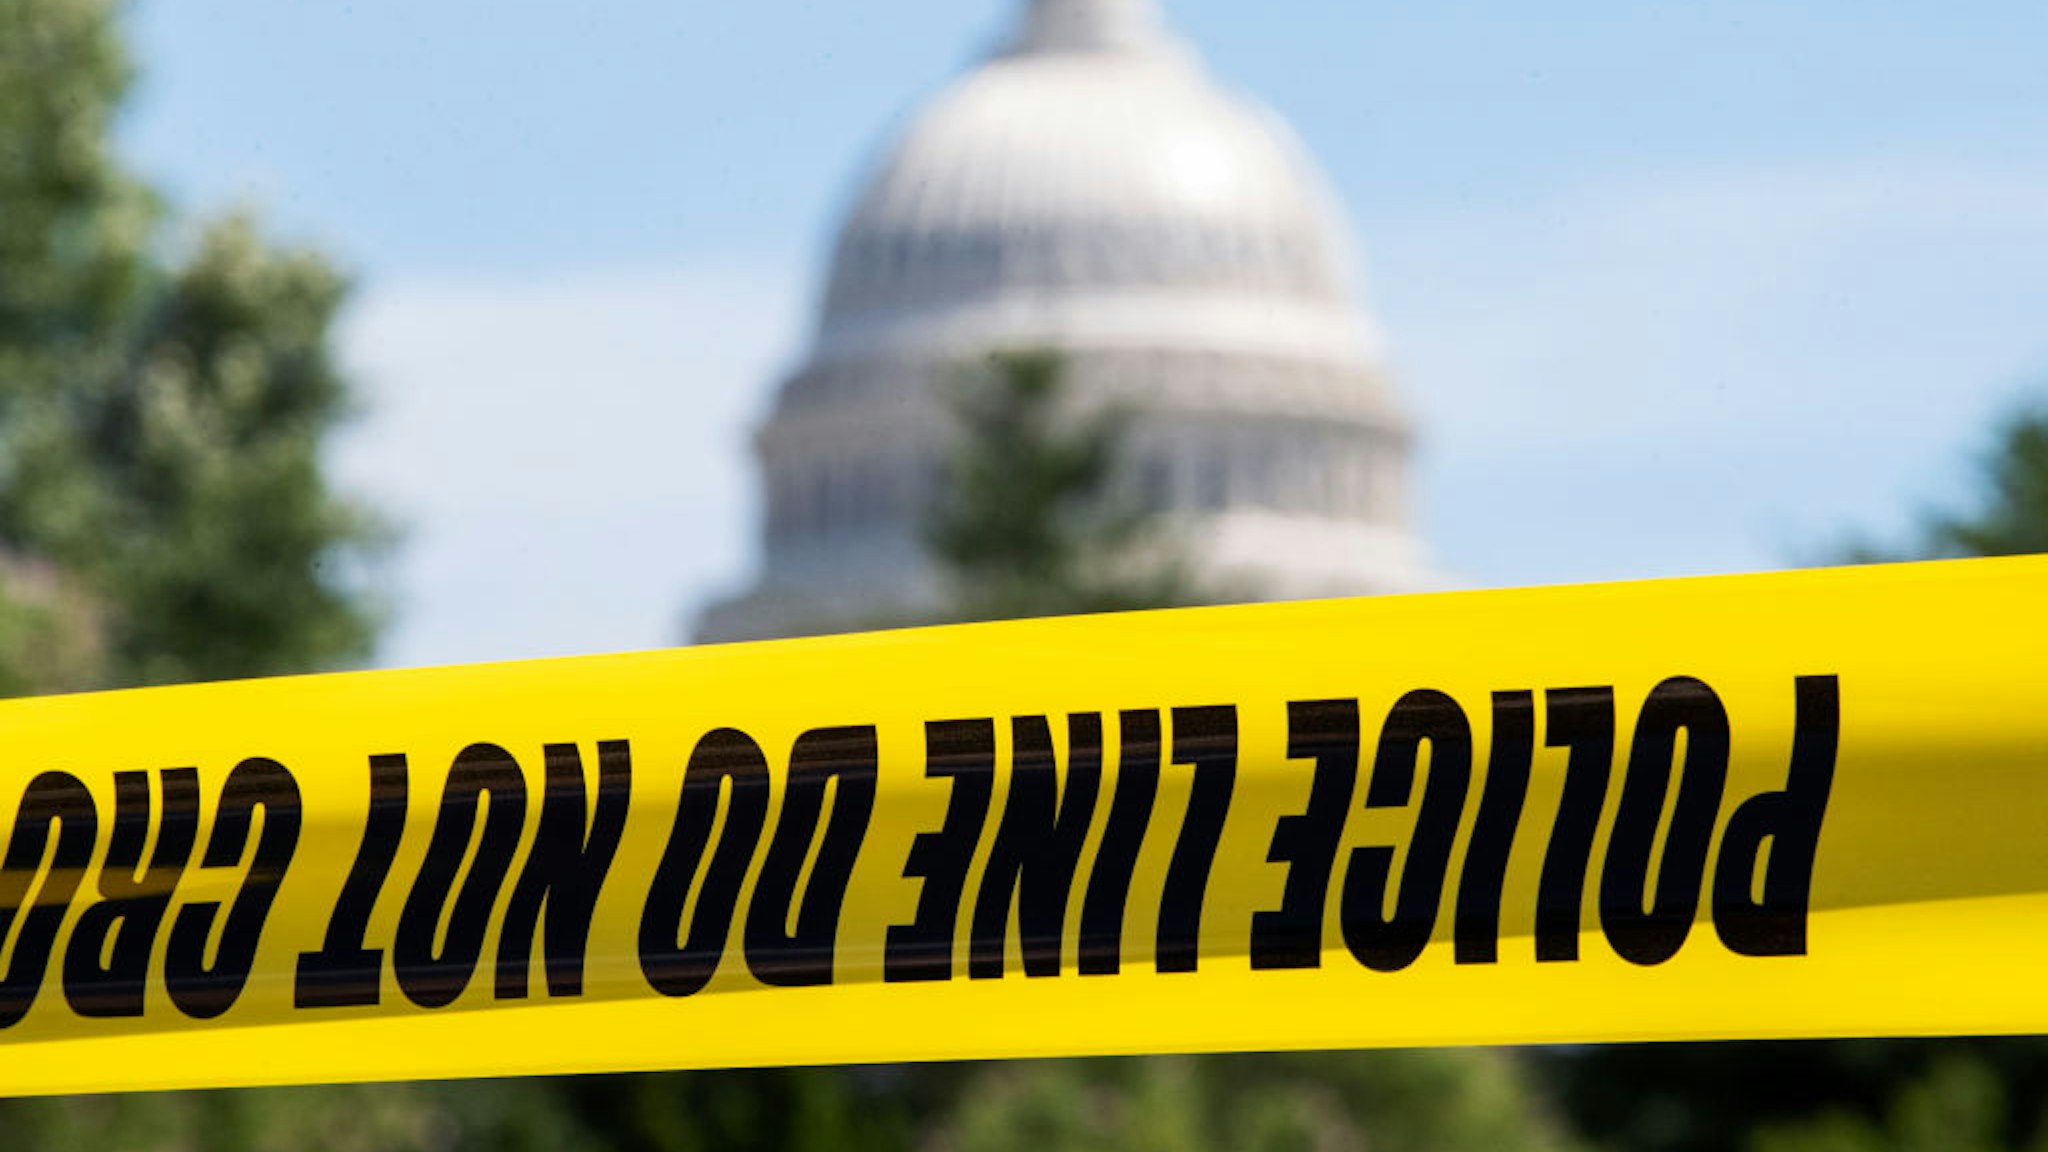 UNITED STATES - AUGUST 19: Police tape is seen on Independence Avenue, SW, during the active threat of a man claiming he has a bomb near the Library of Congress buildings on Thursday, August 19, 2021. (Photo By Tom Williams/CQ-Roll Call, Inc via Getty Images)